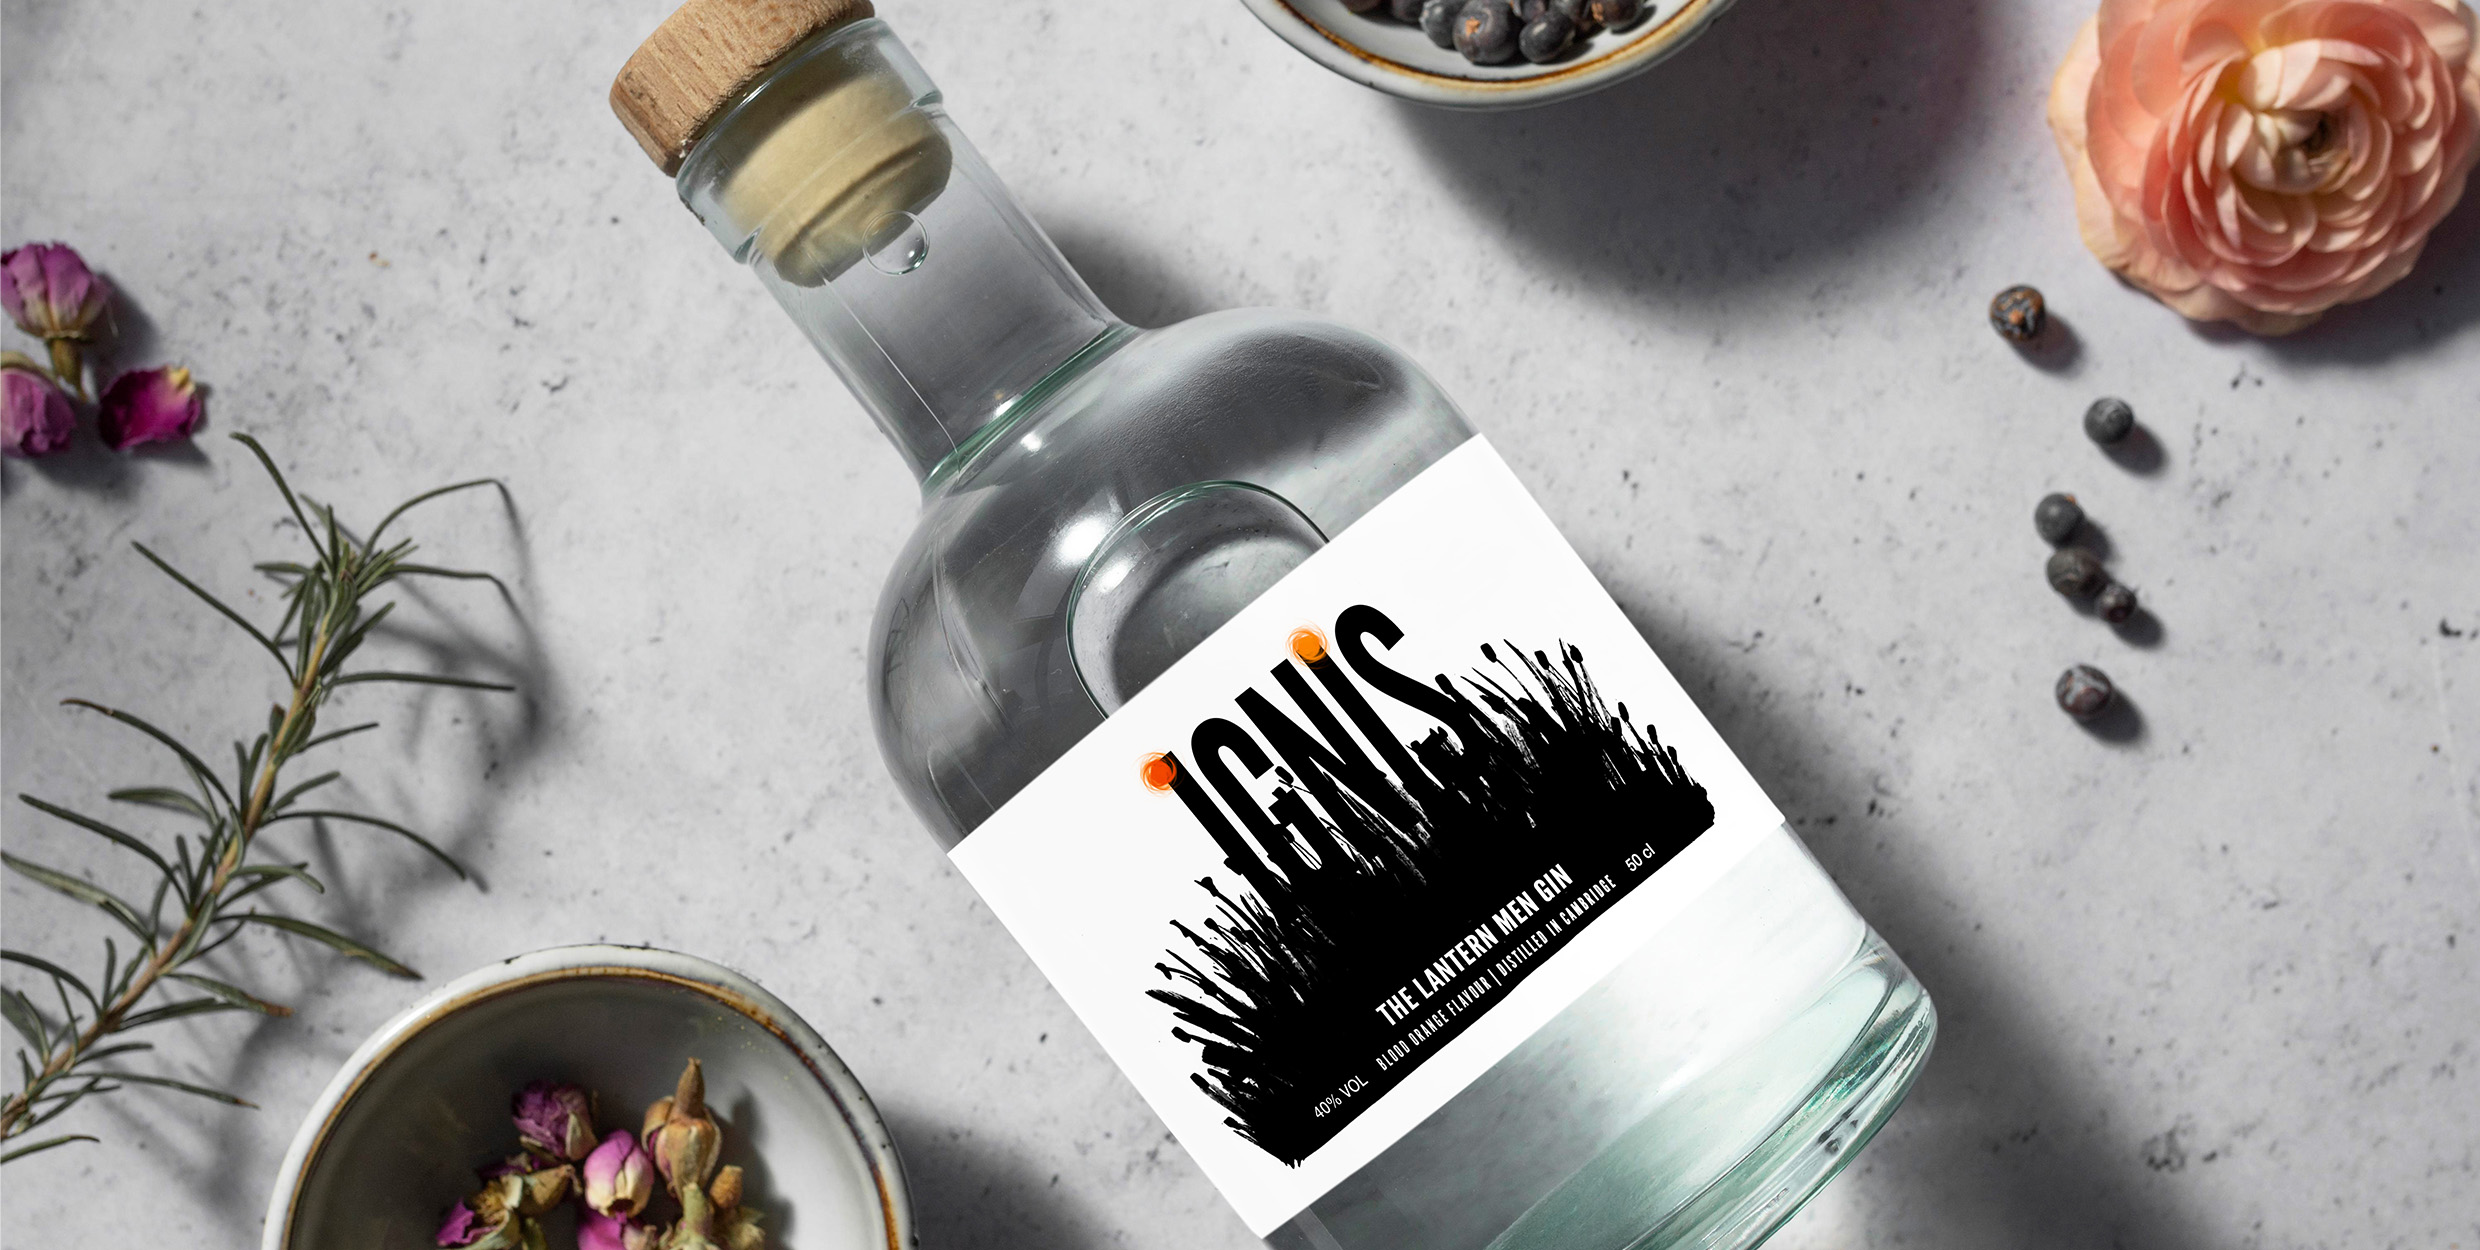 IGNIS is a gin drinks packaging inspired by the folklore tale The Lantern Men based around Cambridge and other parts of East Anglia. Using mark making through inspiration of east anglian landscapes with pops of colours to refer to the spirits.